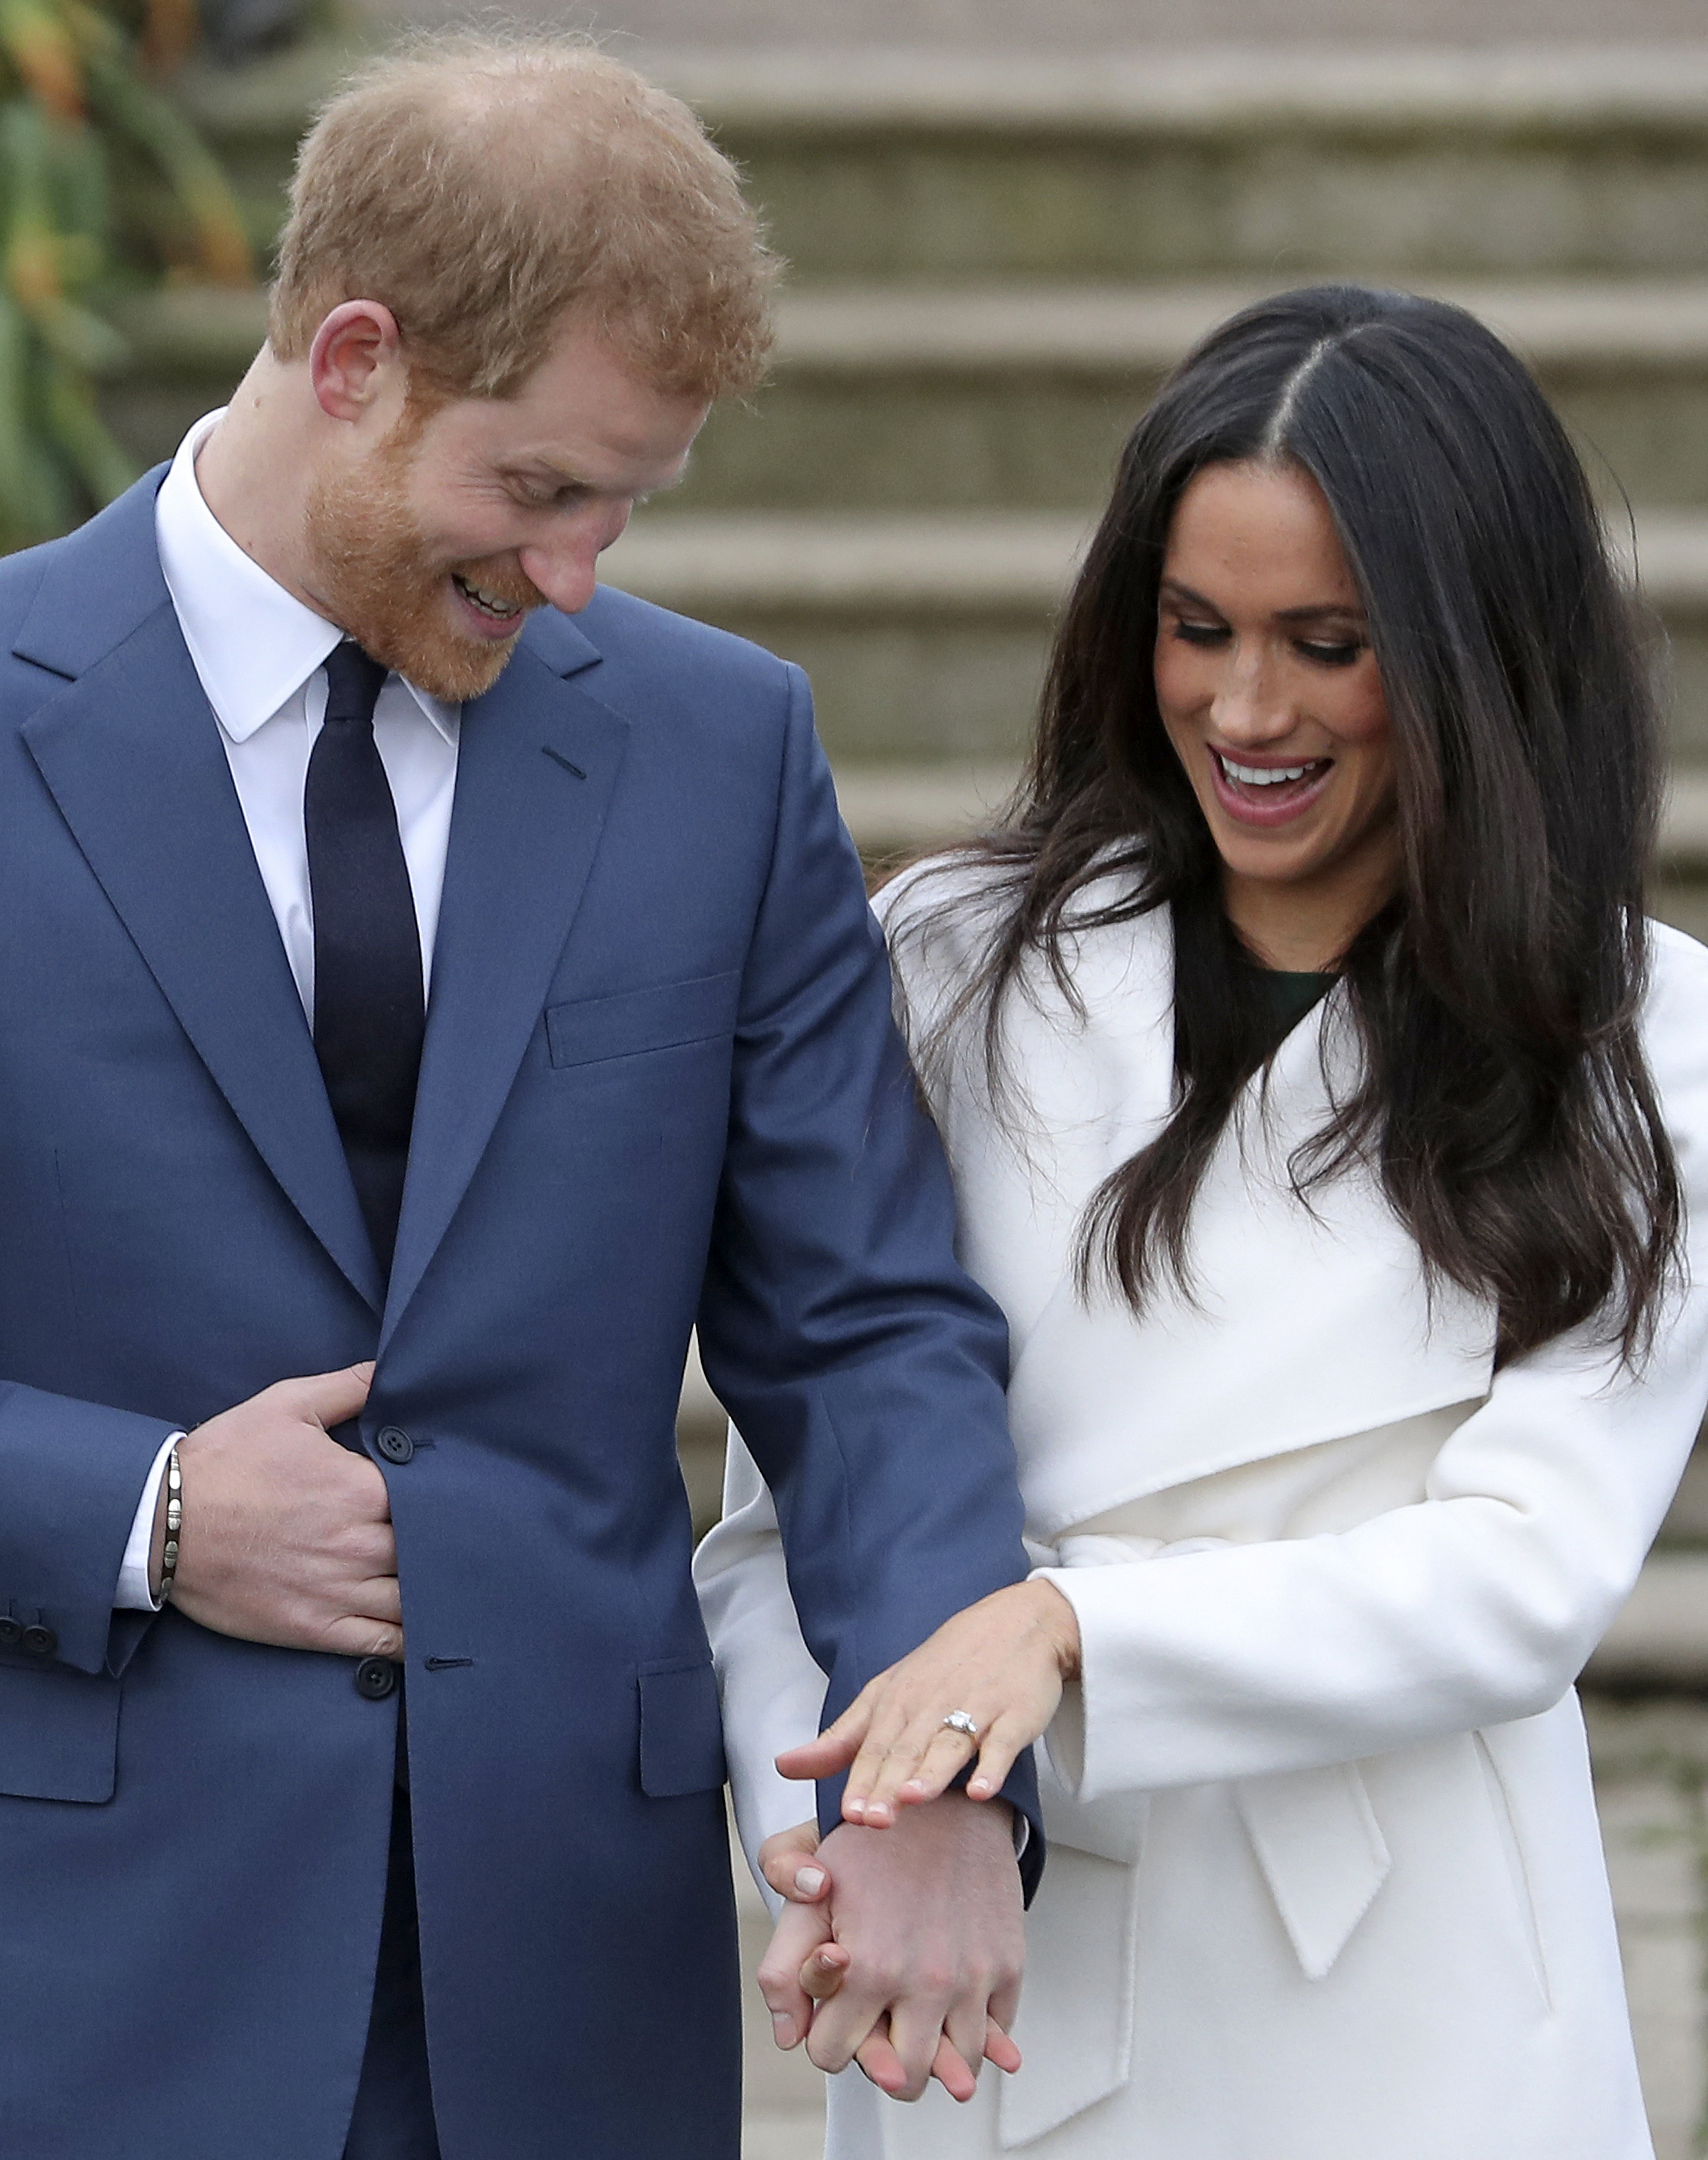 Prince Harry with Meghan Markle as shows off her engagement ring whilst they pose for a photograph in the Sunken Garden at Kensington Palace in west London on November 27, 2017 | Source: Getty Images